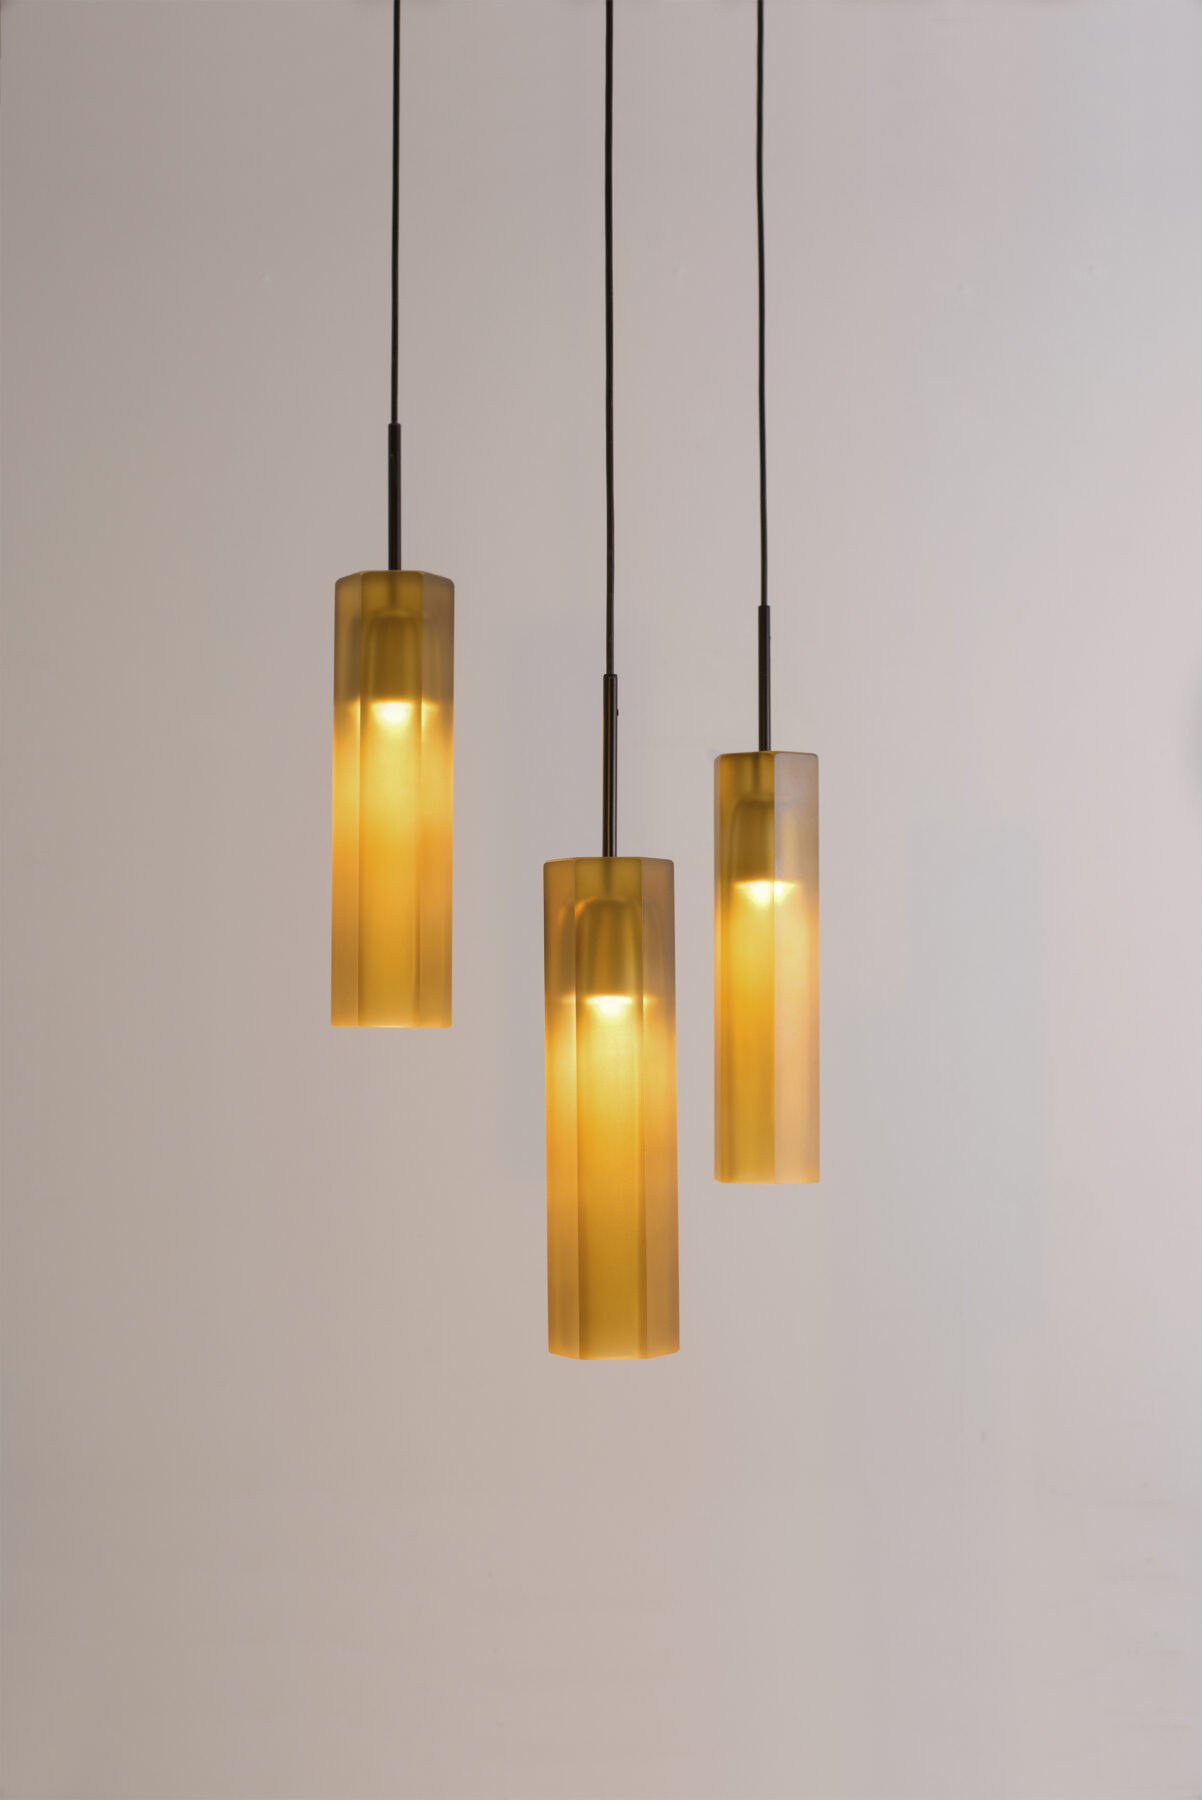 HON pendant lamps made of honey-colored glass with a black cable.